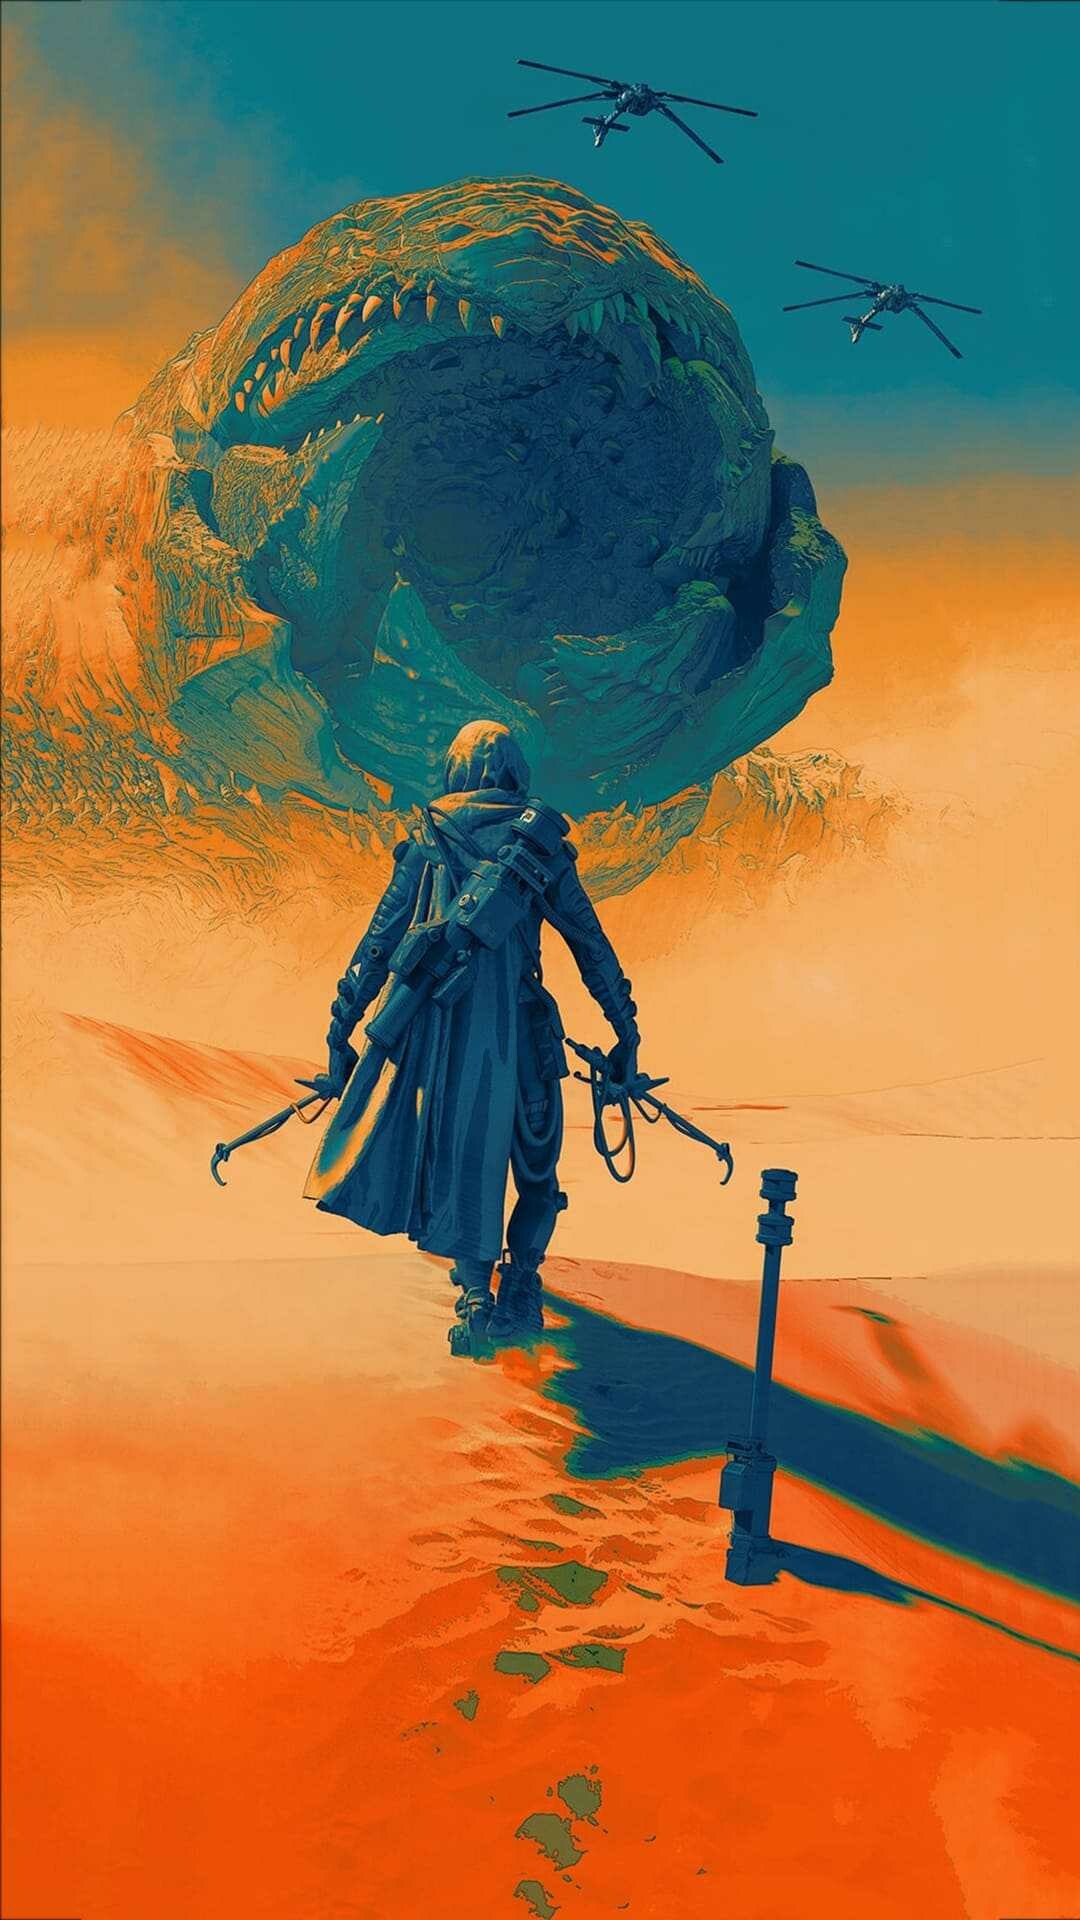 Dune (2021): The film won 6 Oscars including "Best Achievement in Visual Effects" and "Best Achievement in Music Written for Motion Pictures". 1080x1920 Full HD Wallpaper.